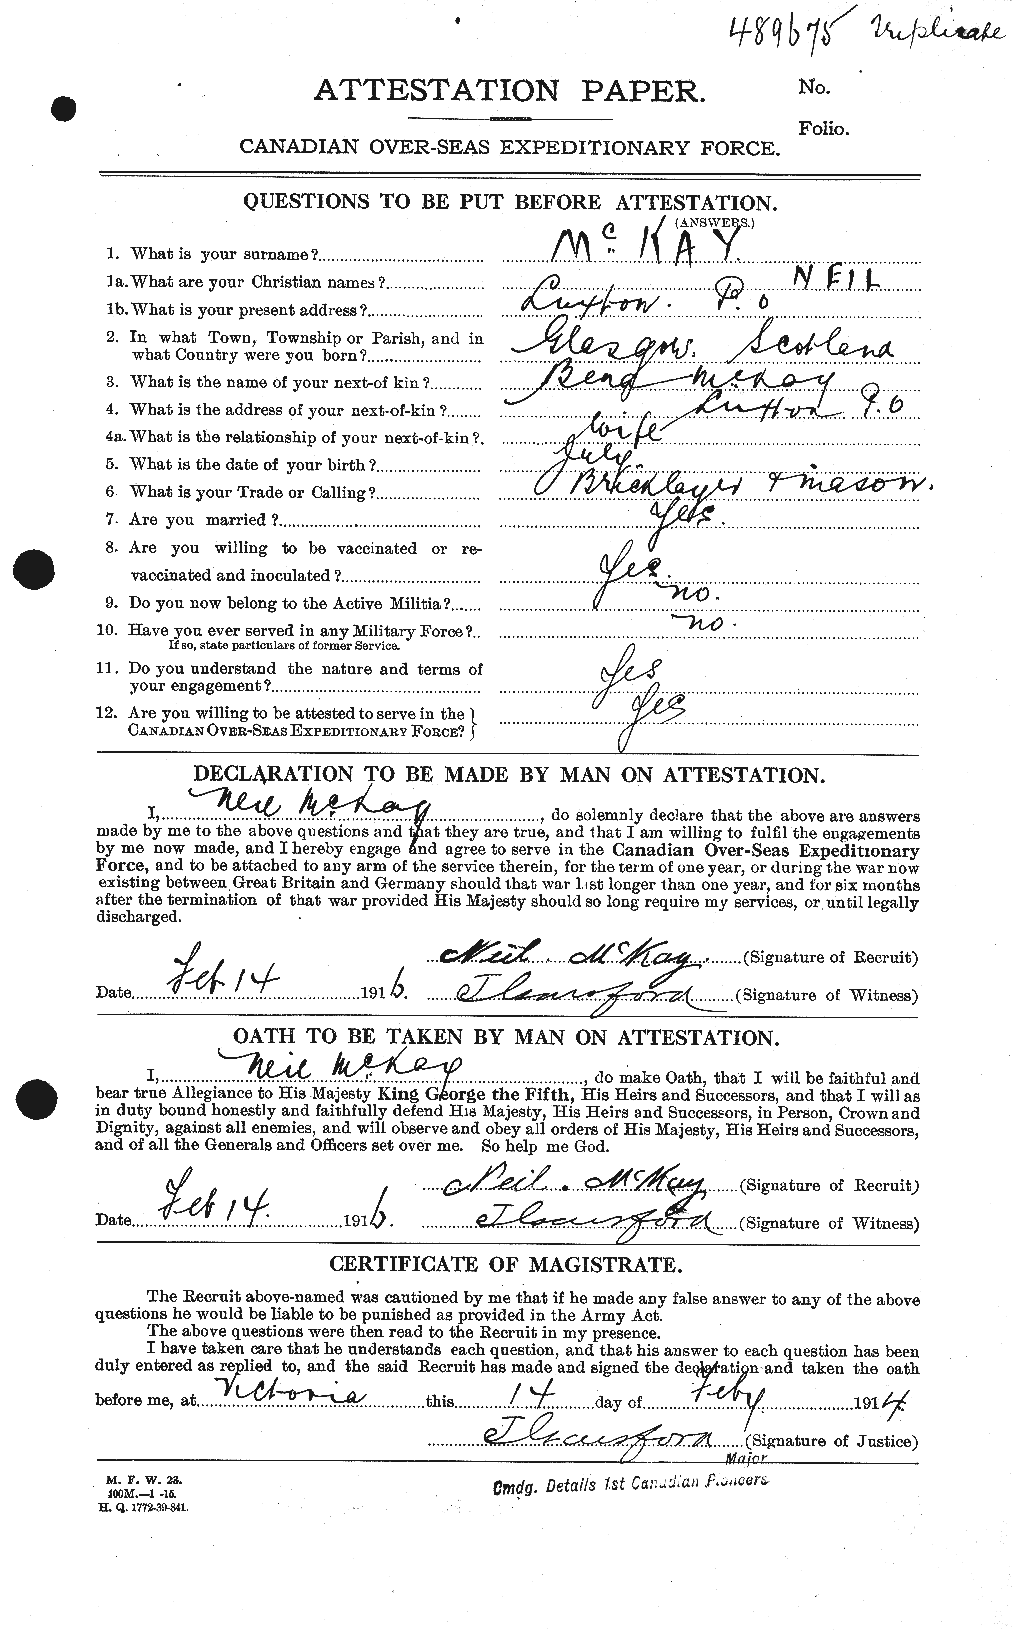 Personnel Records of the First World War - CEF 527196a